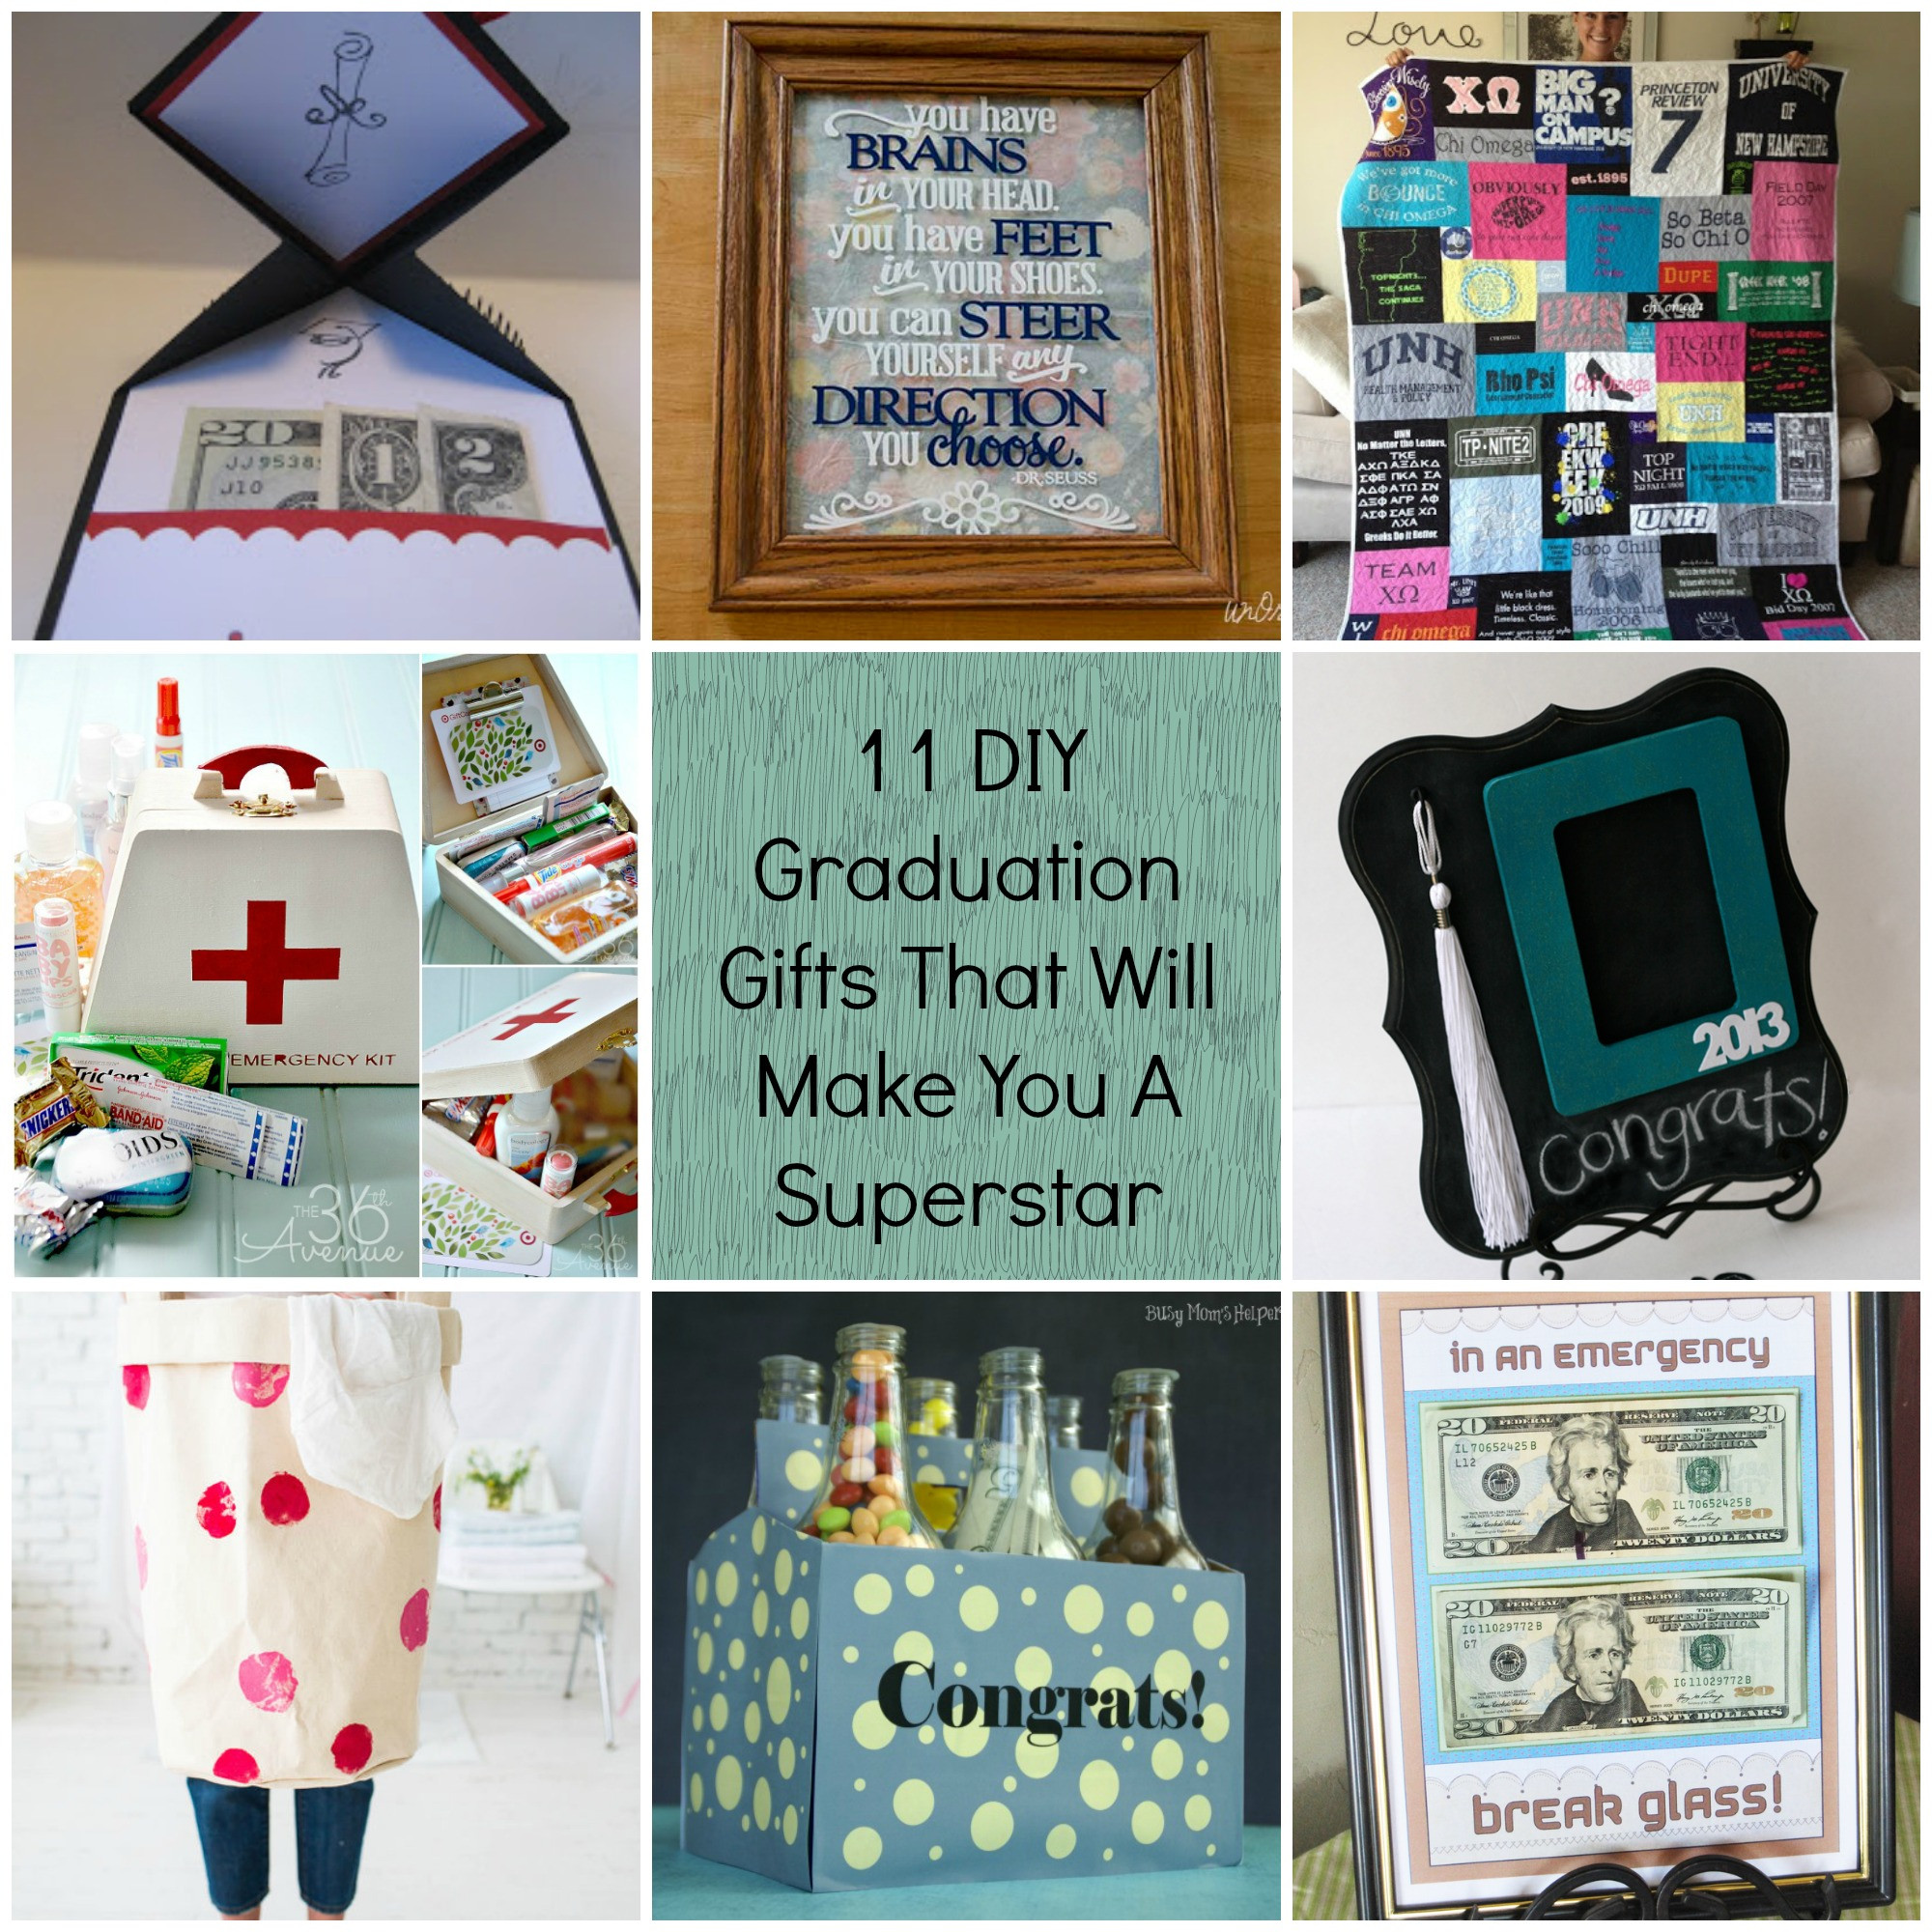 Small Graduation Gift Ideas
 11 DIY Graduation Gifts That Will Make You A Superstar